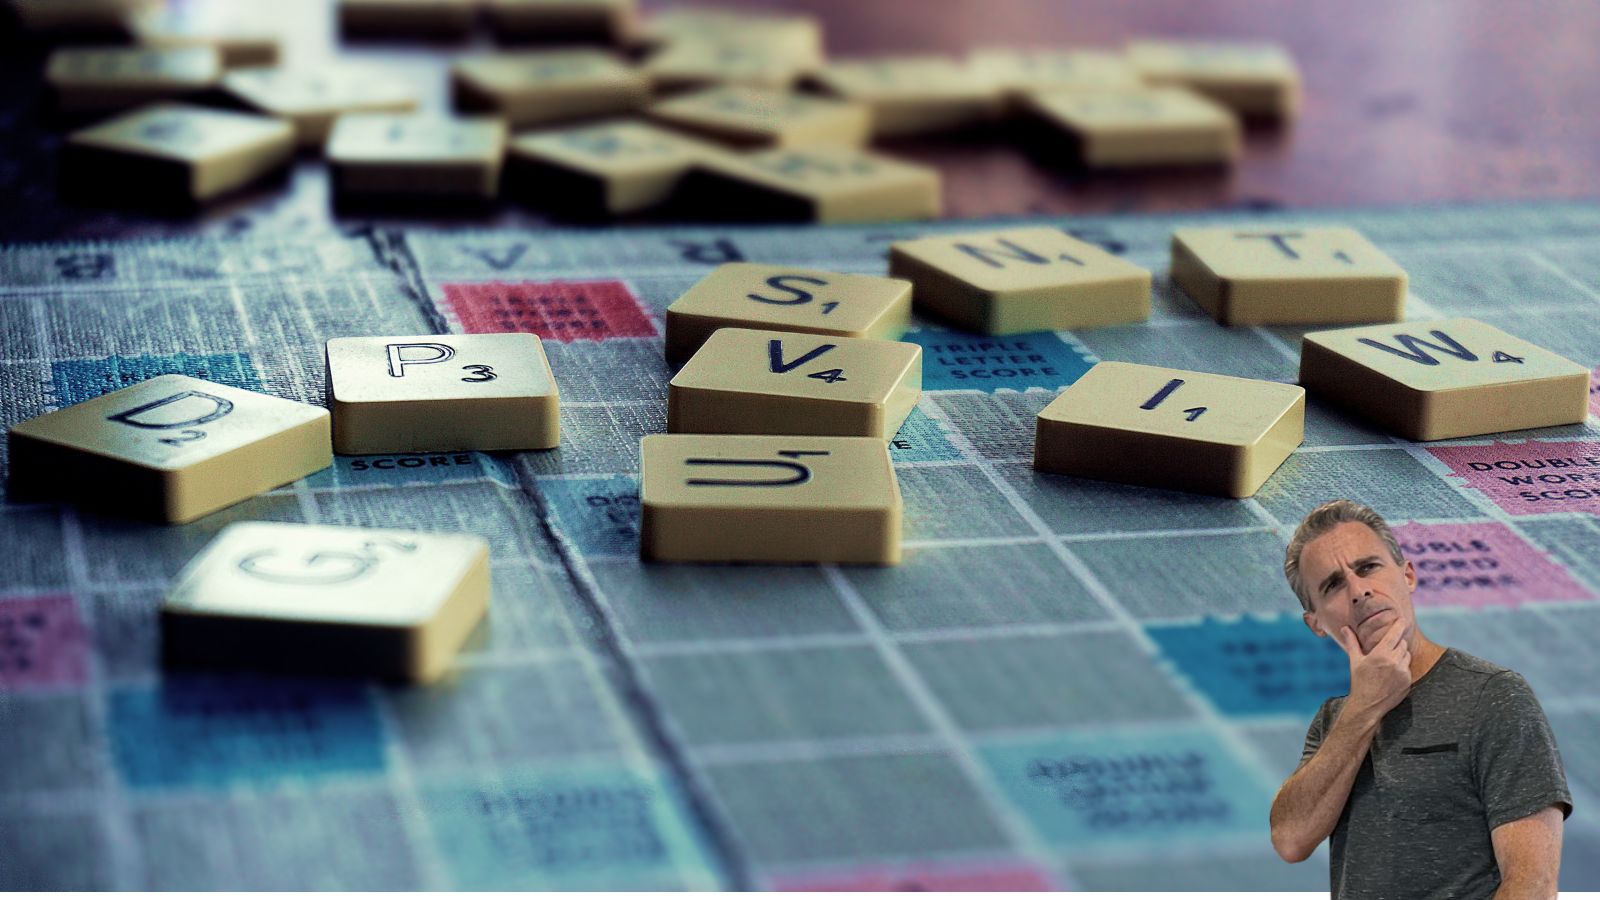 a group of scrabble tiles on a table